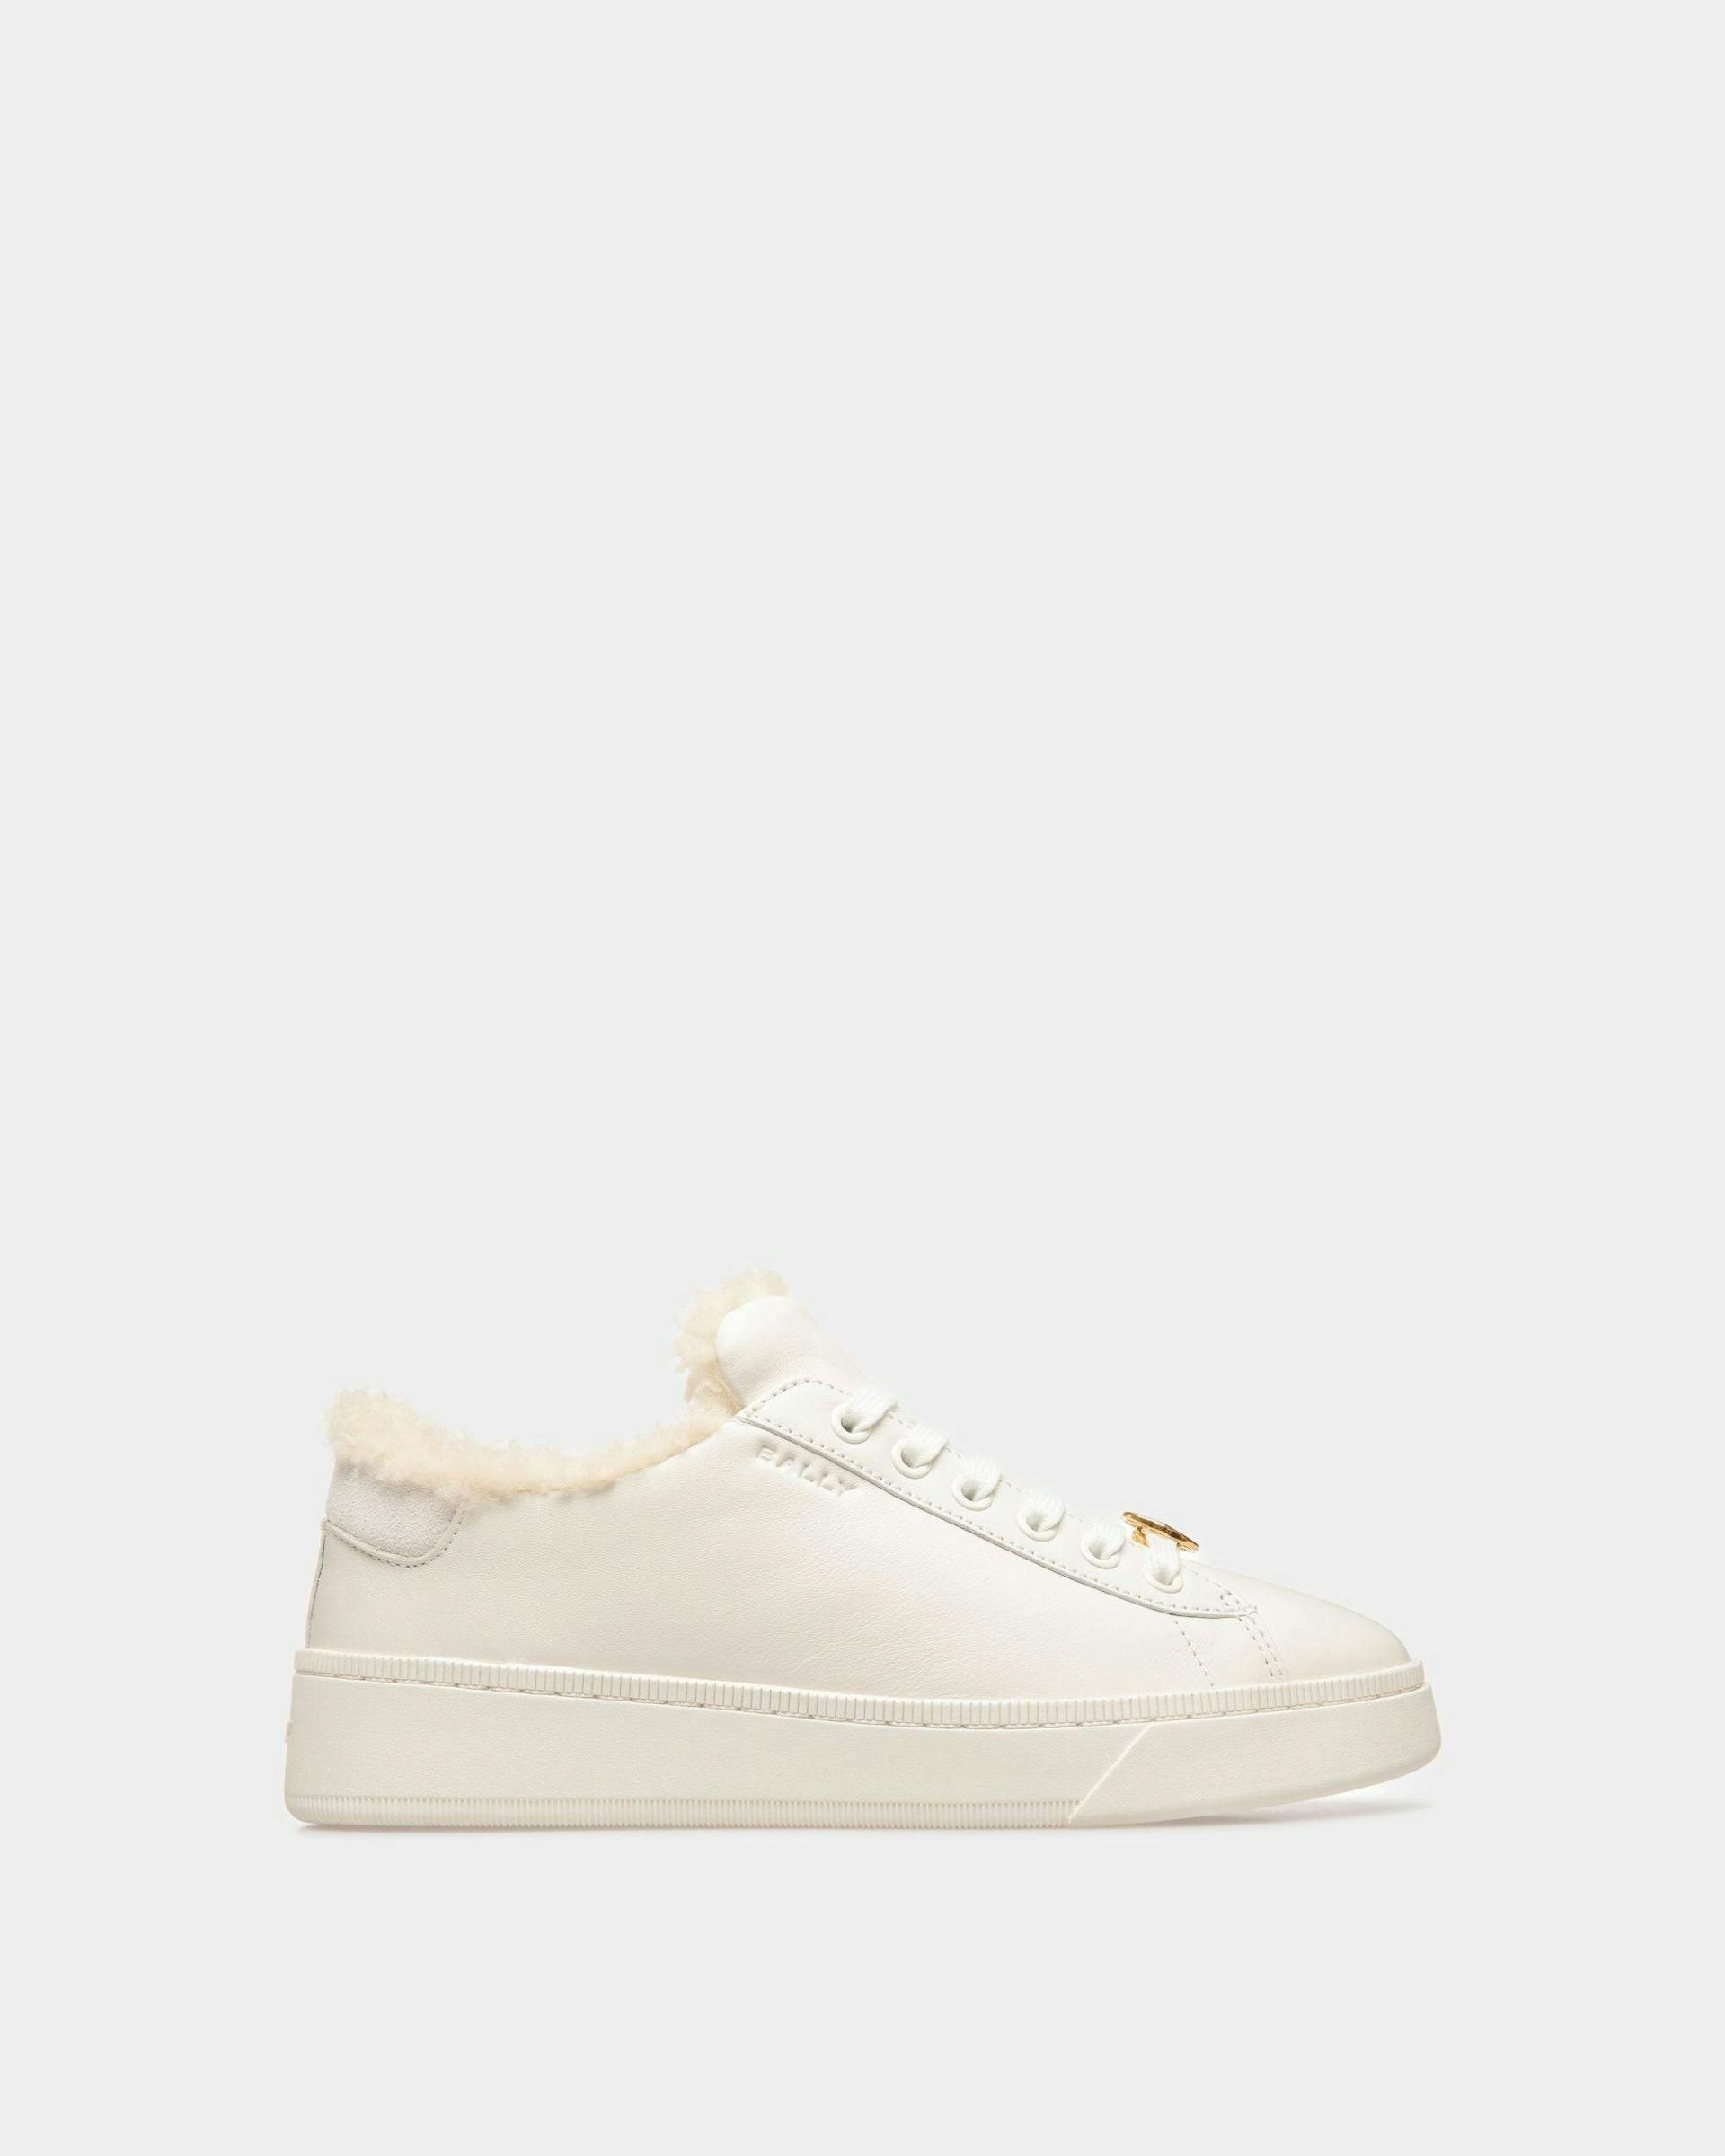 Women's Raise Sneakers In White Leather | Bally | Still Life Side